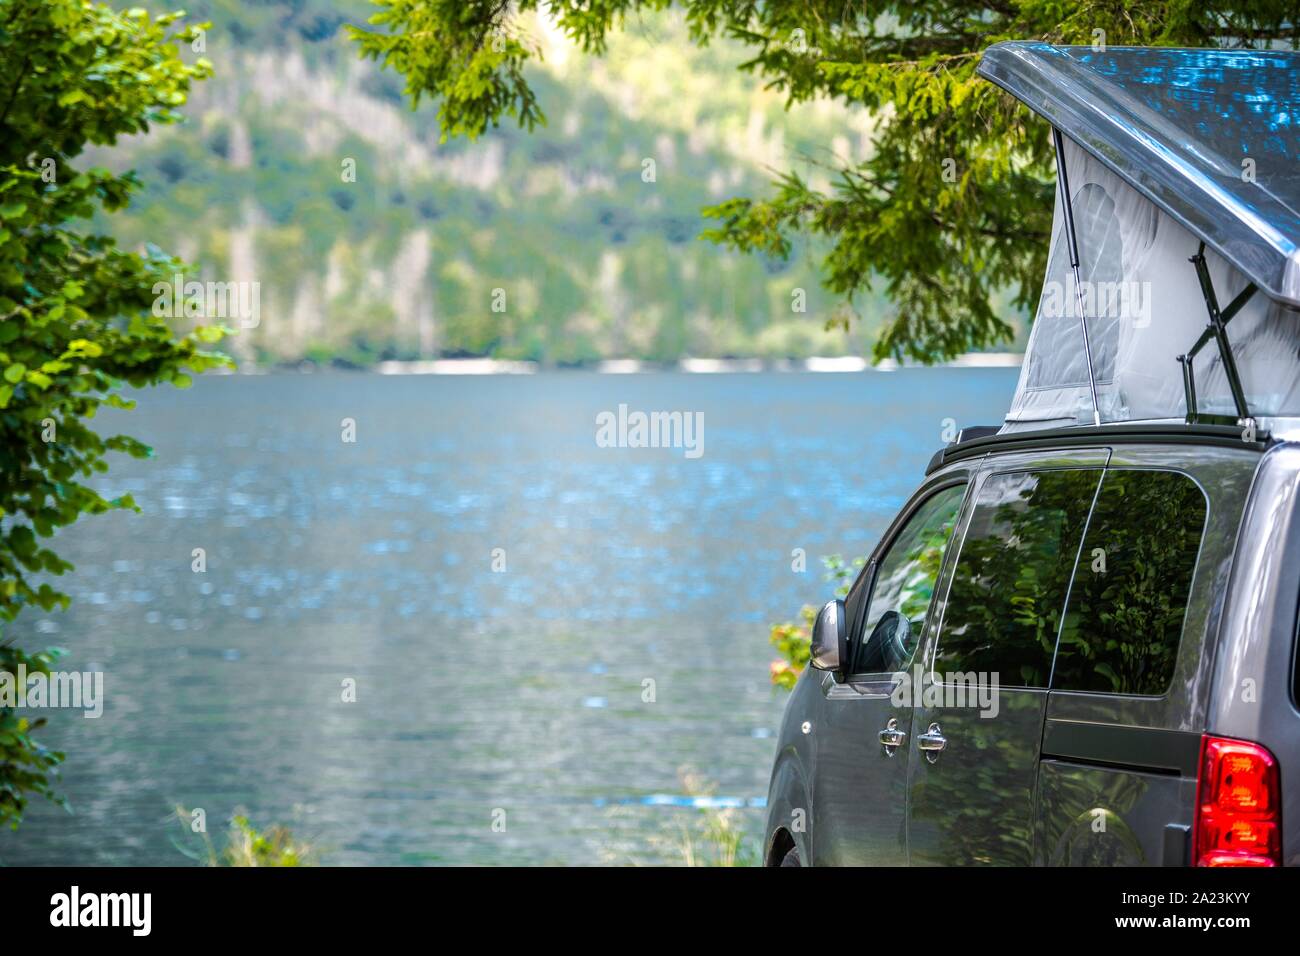 Lake Camping in the Van Rooftop Tent. Modern Camper Van in the Scenic Mountain Location. Stock Photo